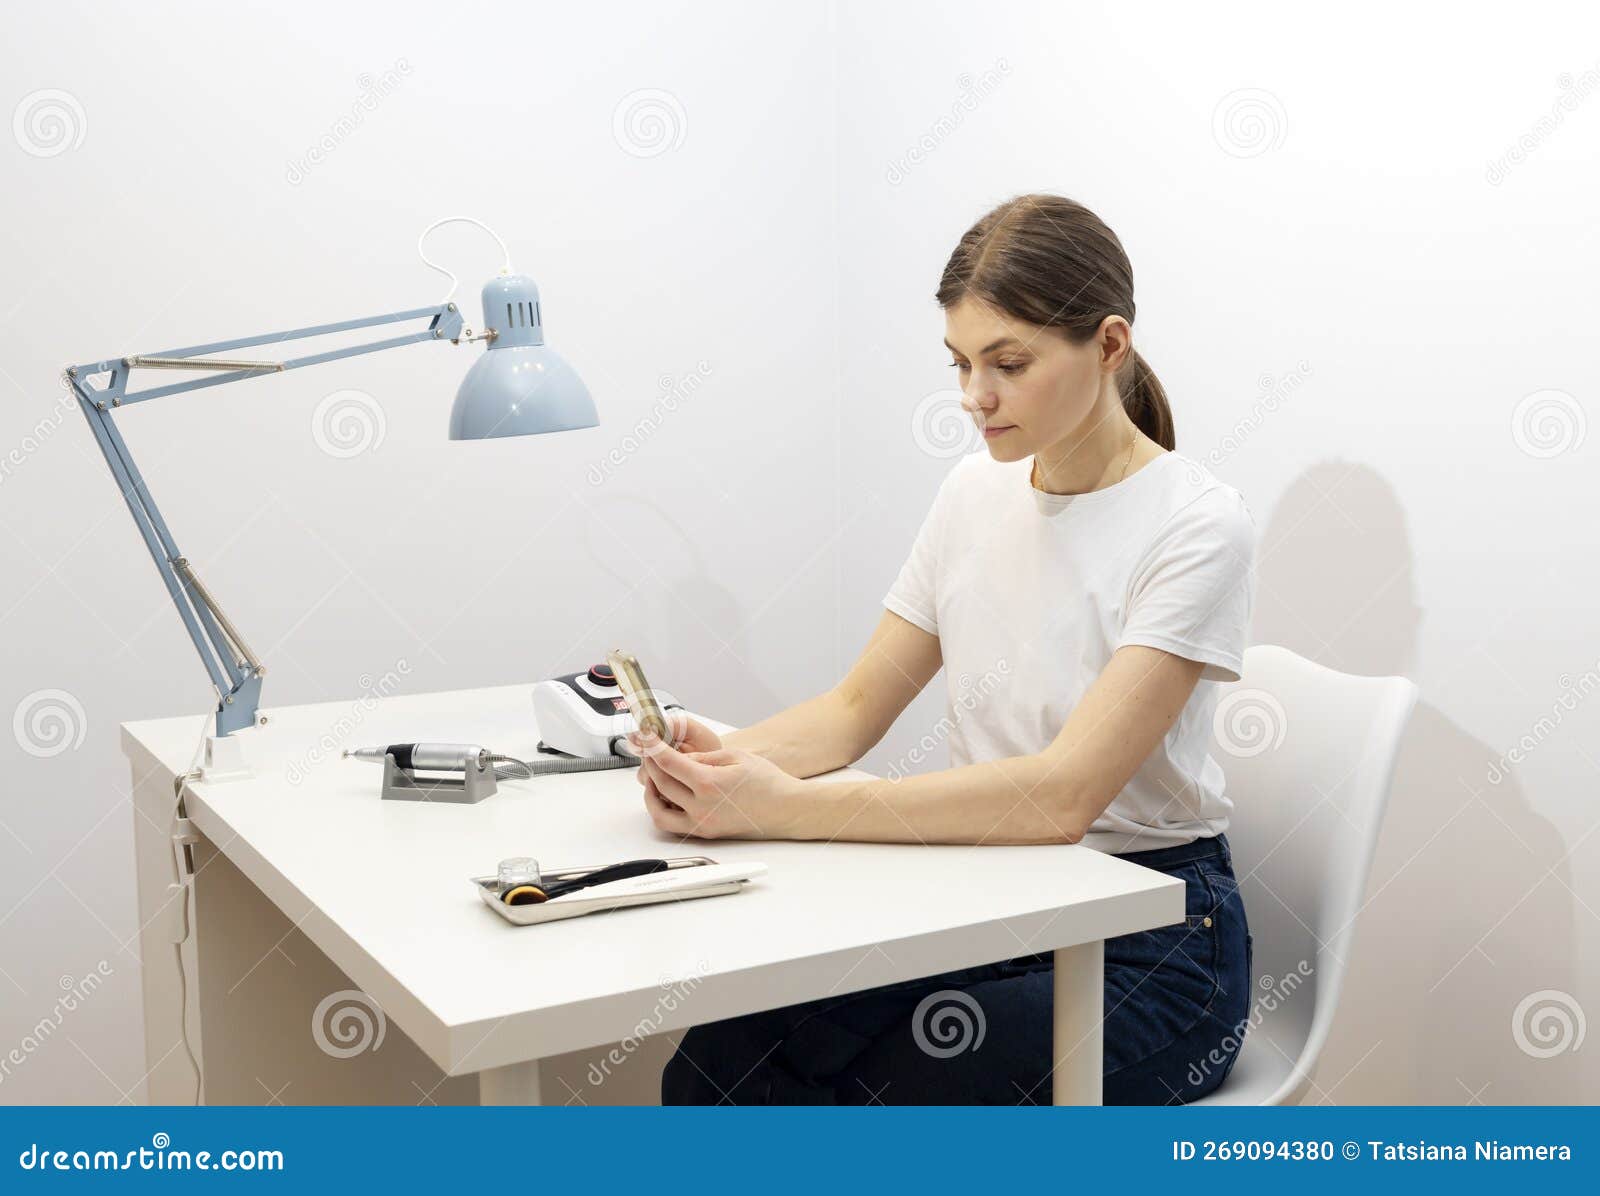 nail beautician hold gadget, looking at smartphone, sitting at workstation in nail beauty